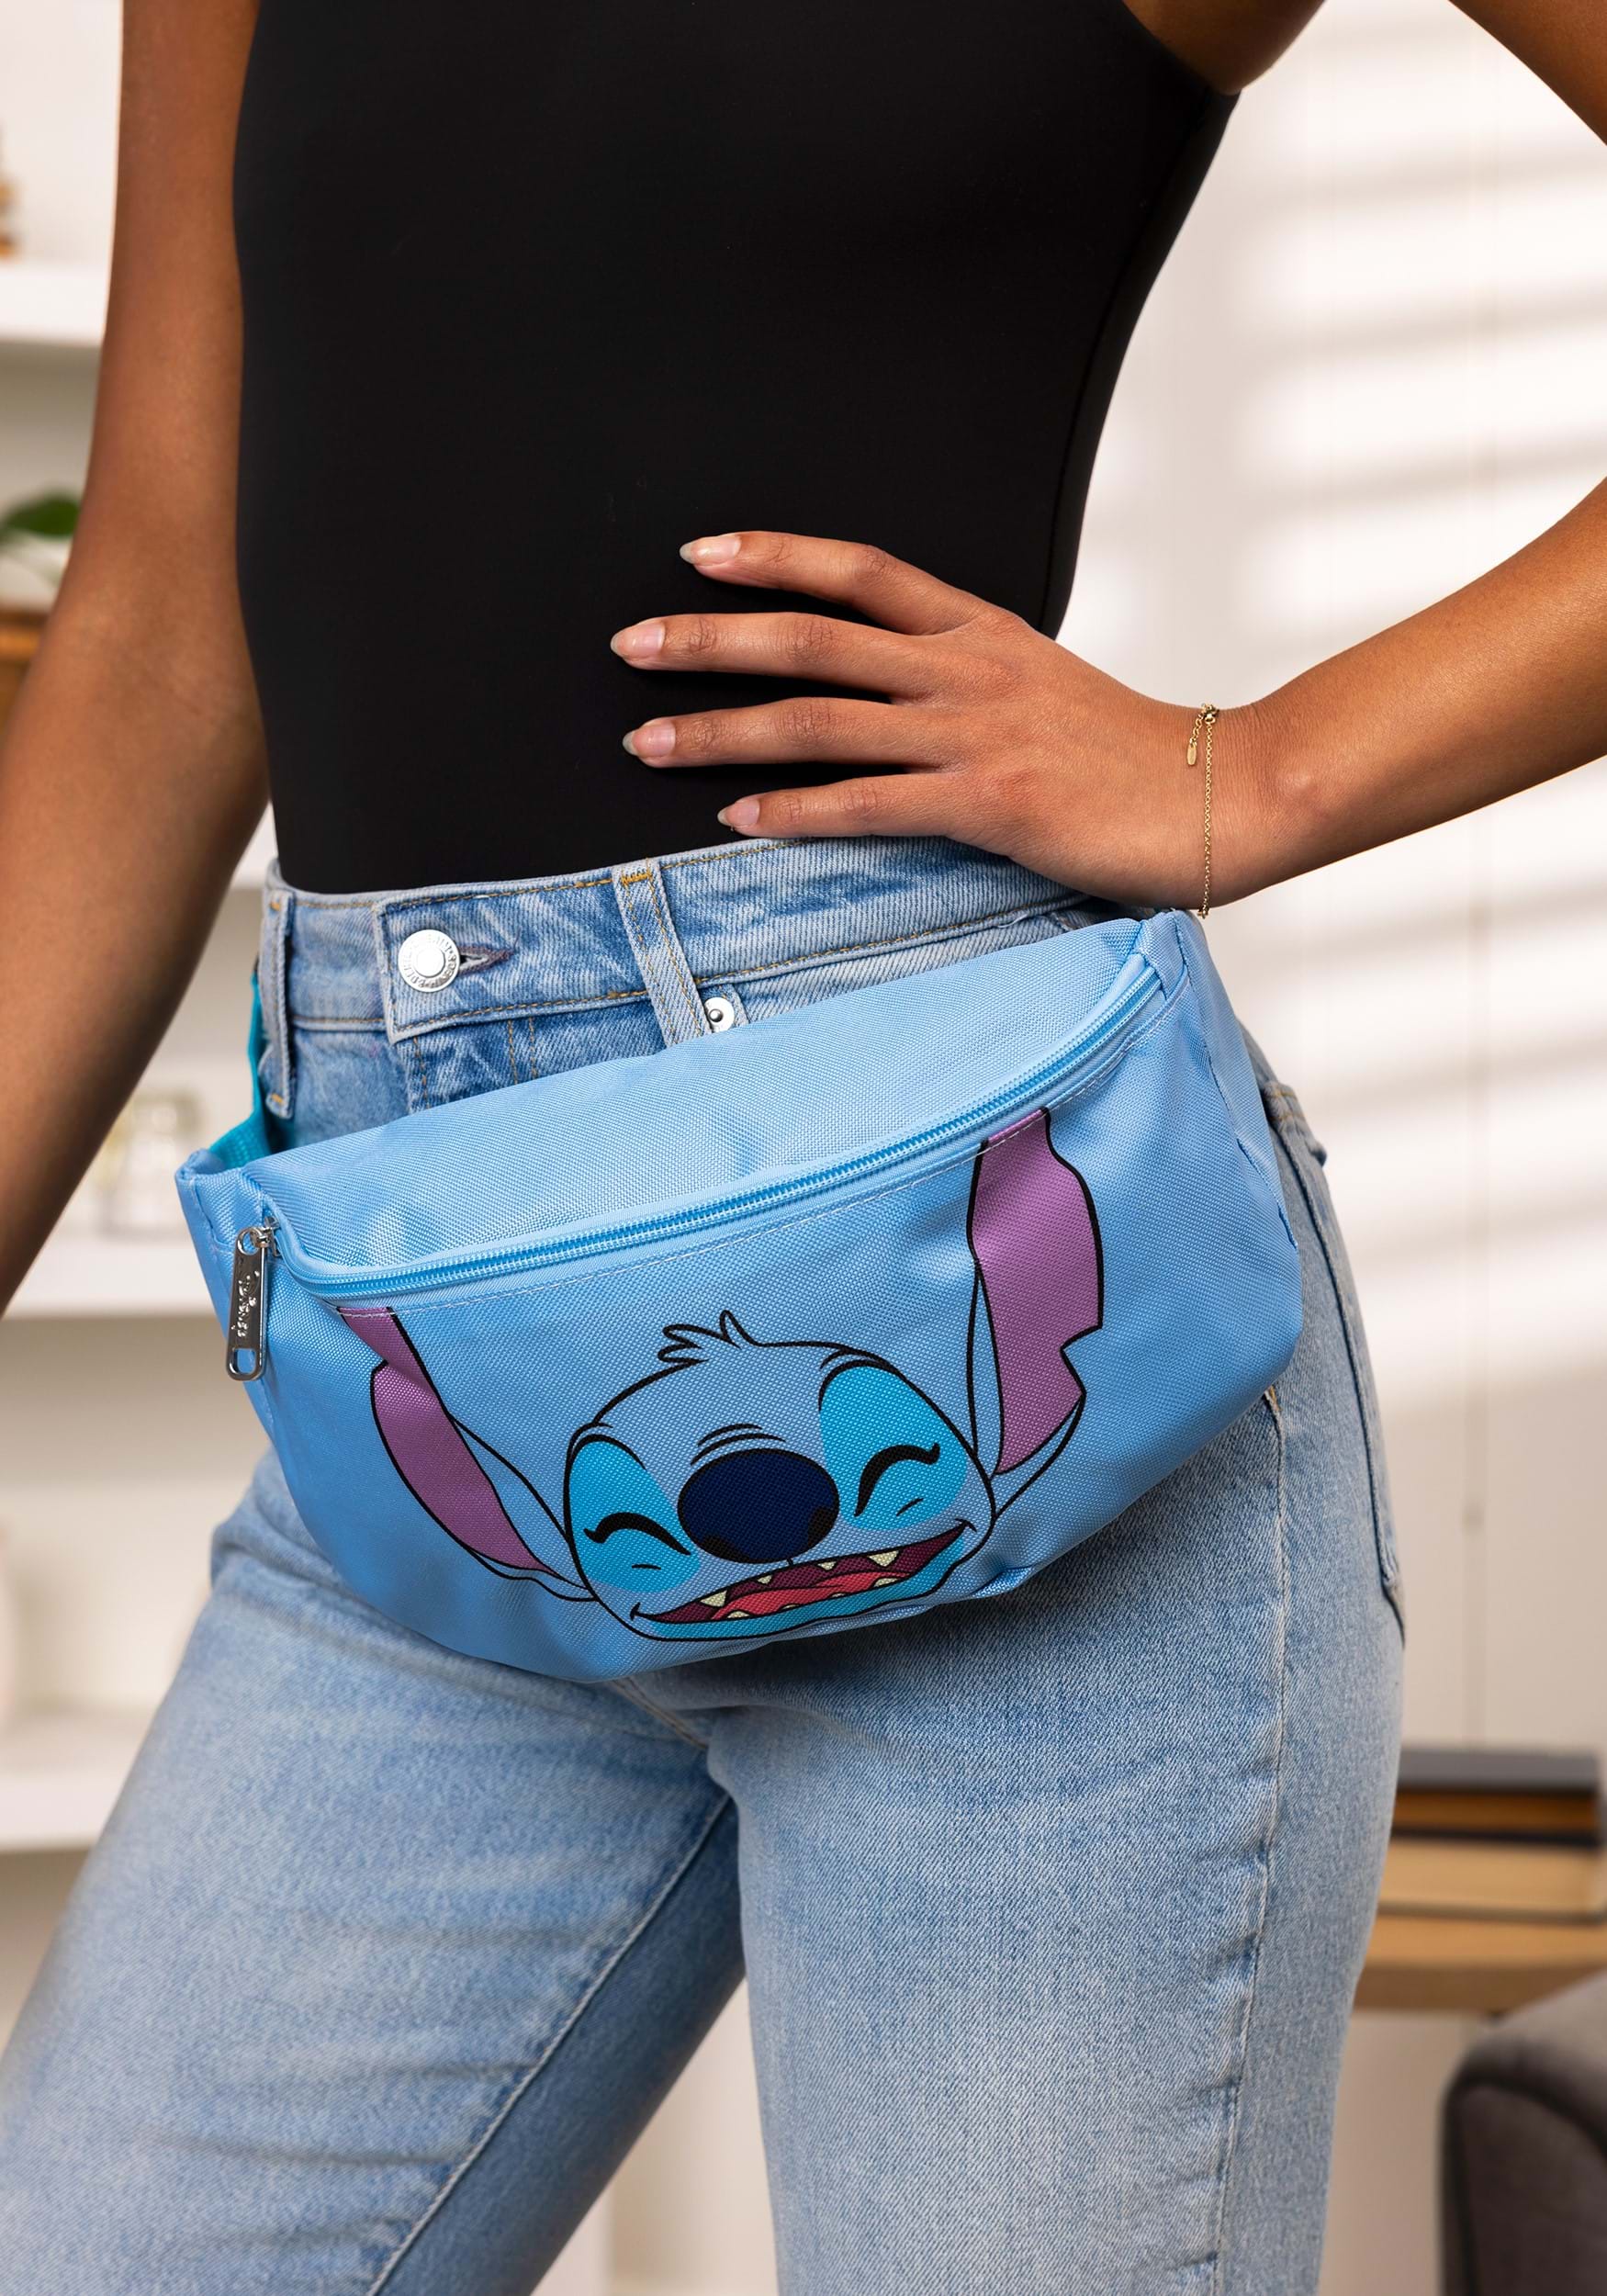 Blue Lilo & Stitch Ears Up Smiling Pose Fanny Pack